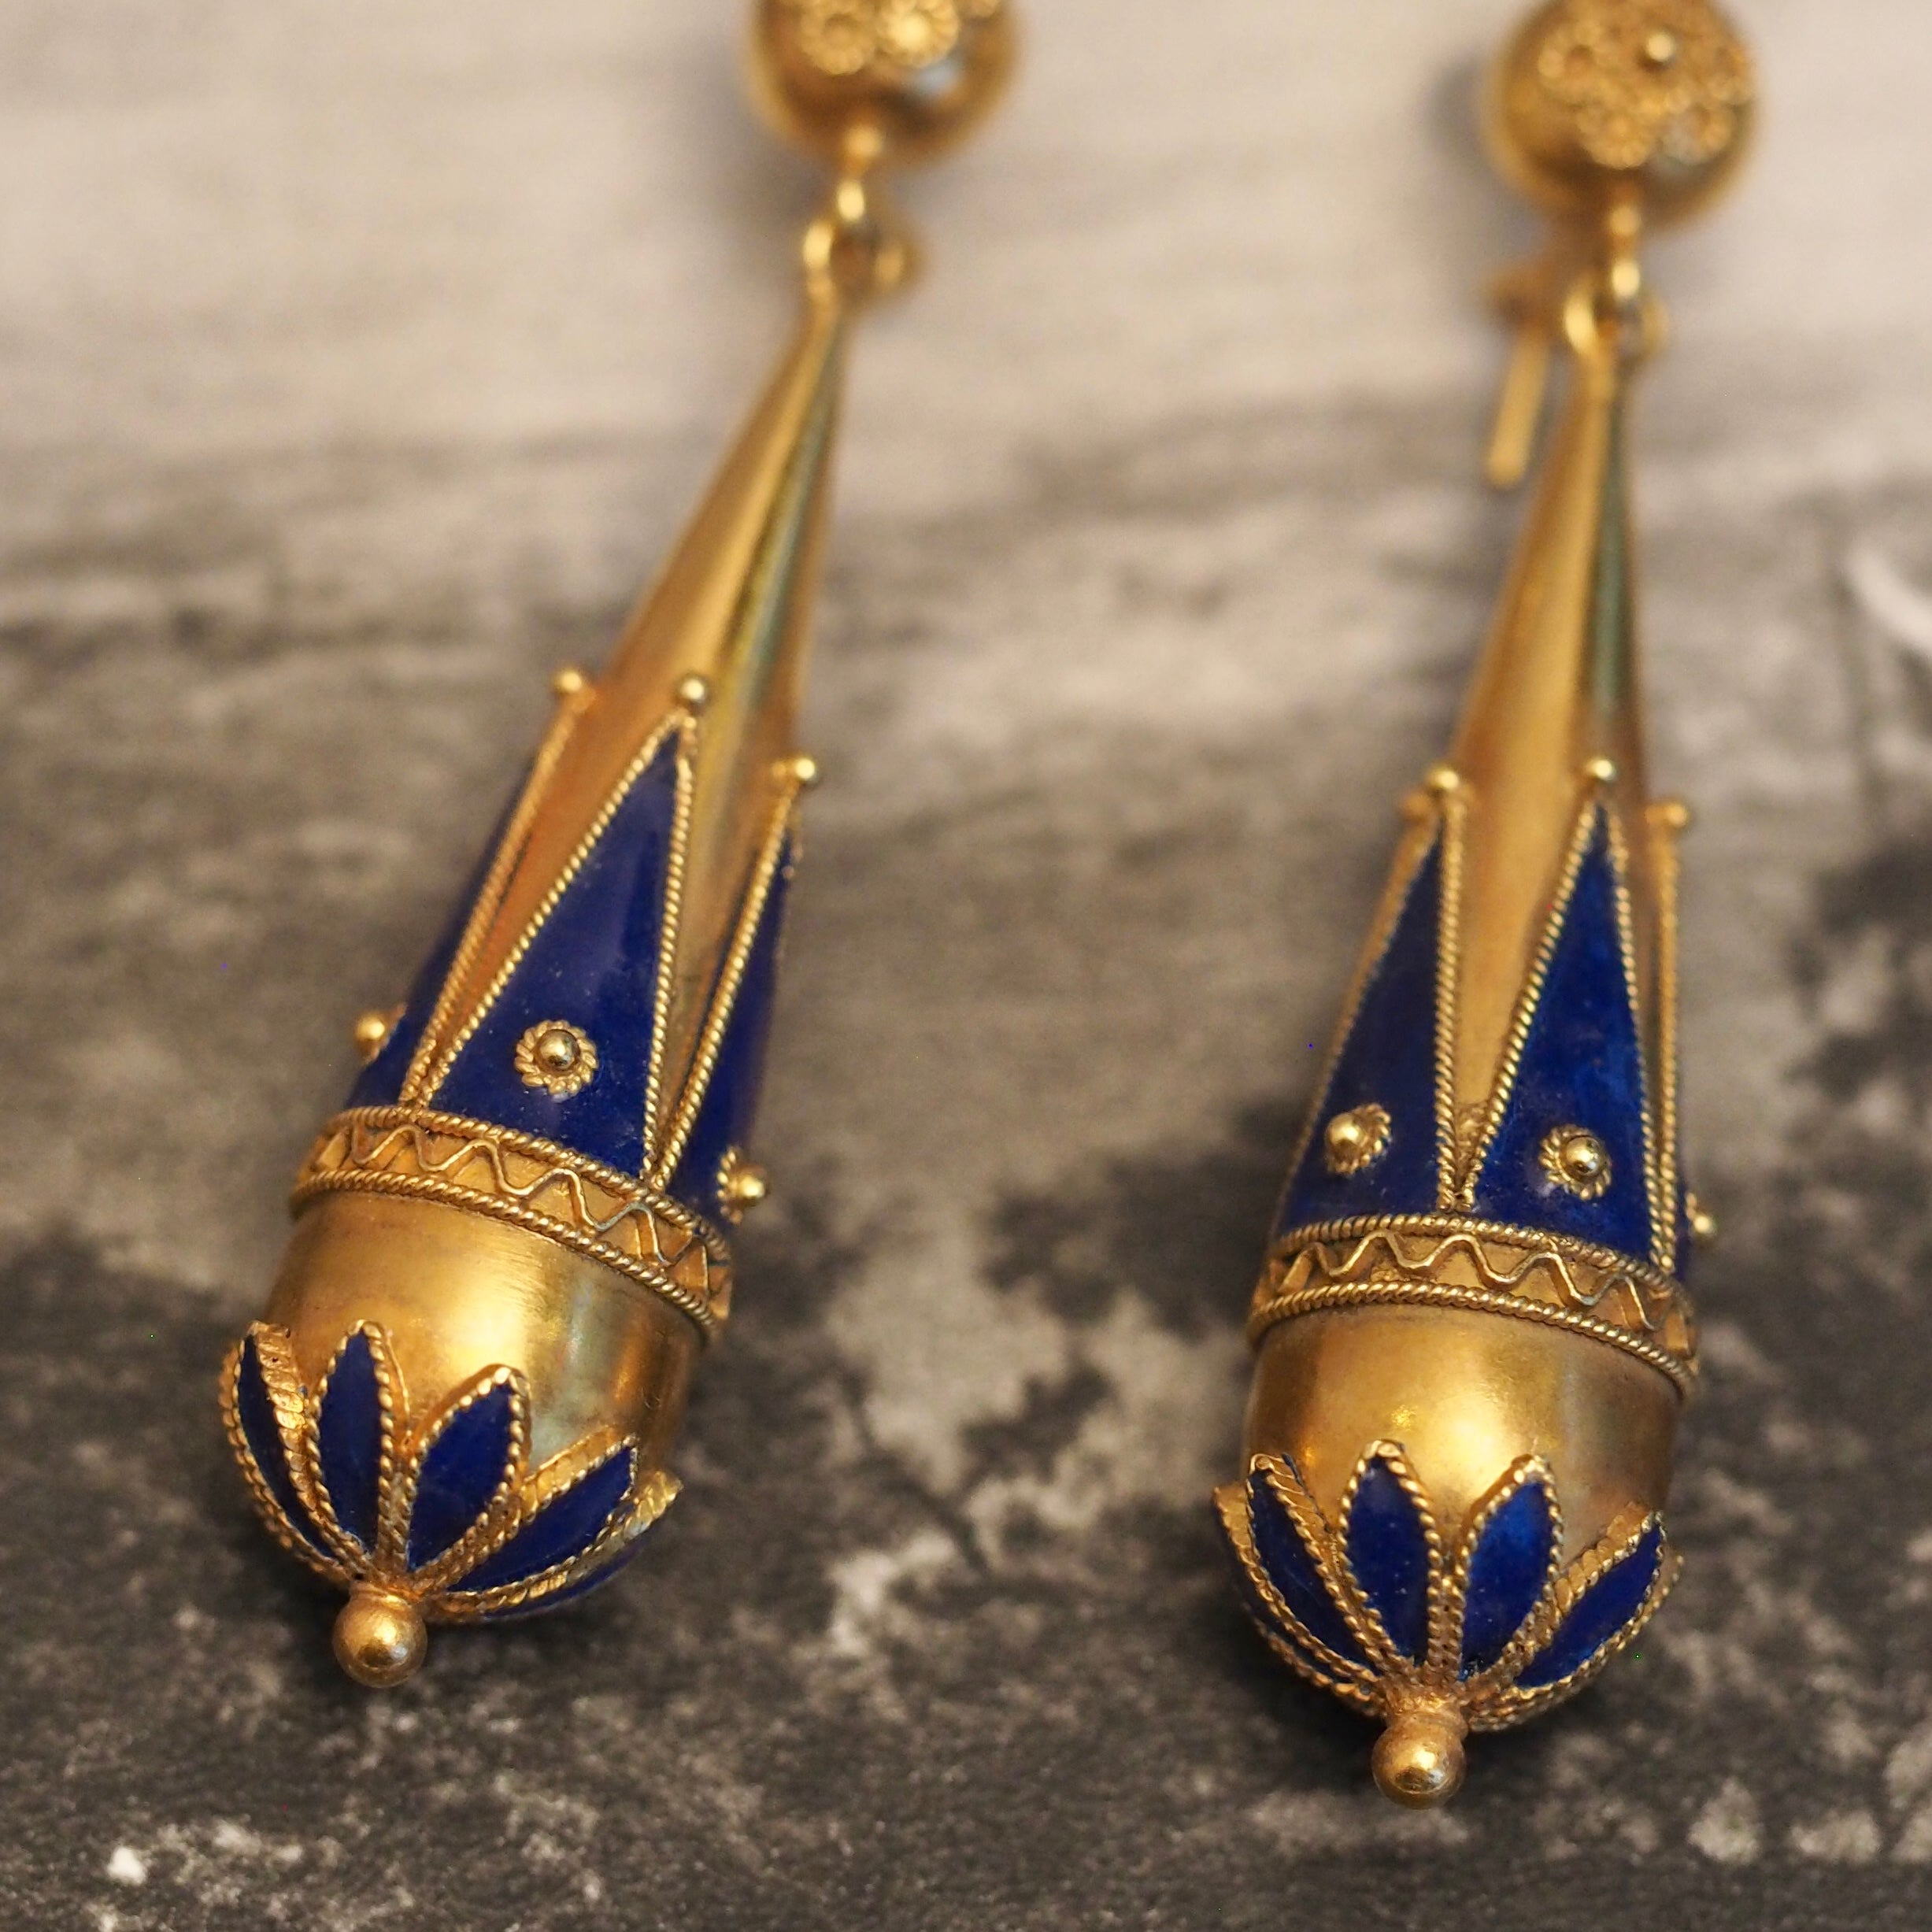 Antique English Victorian 15k Gold and Enamel Torpedo Earrings